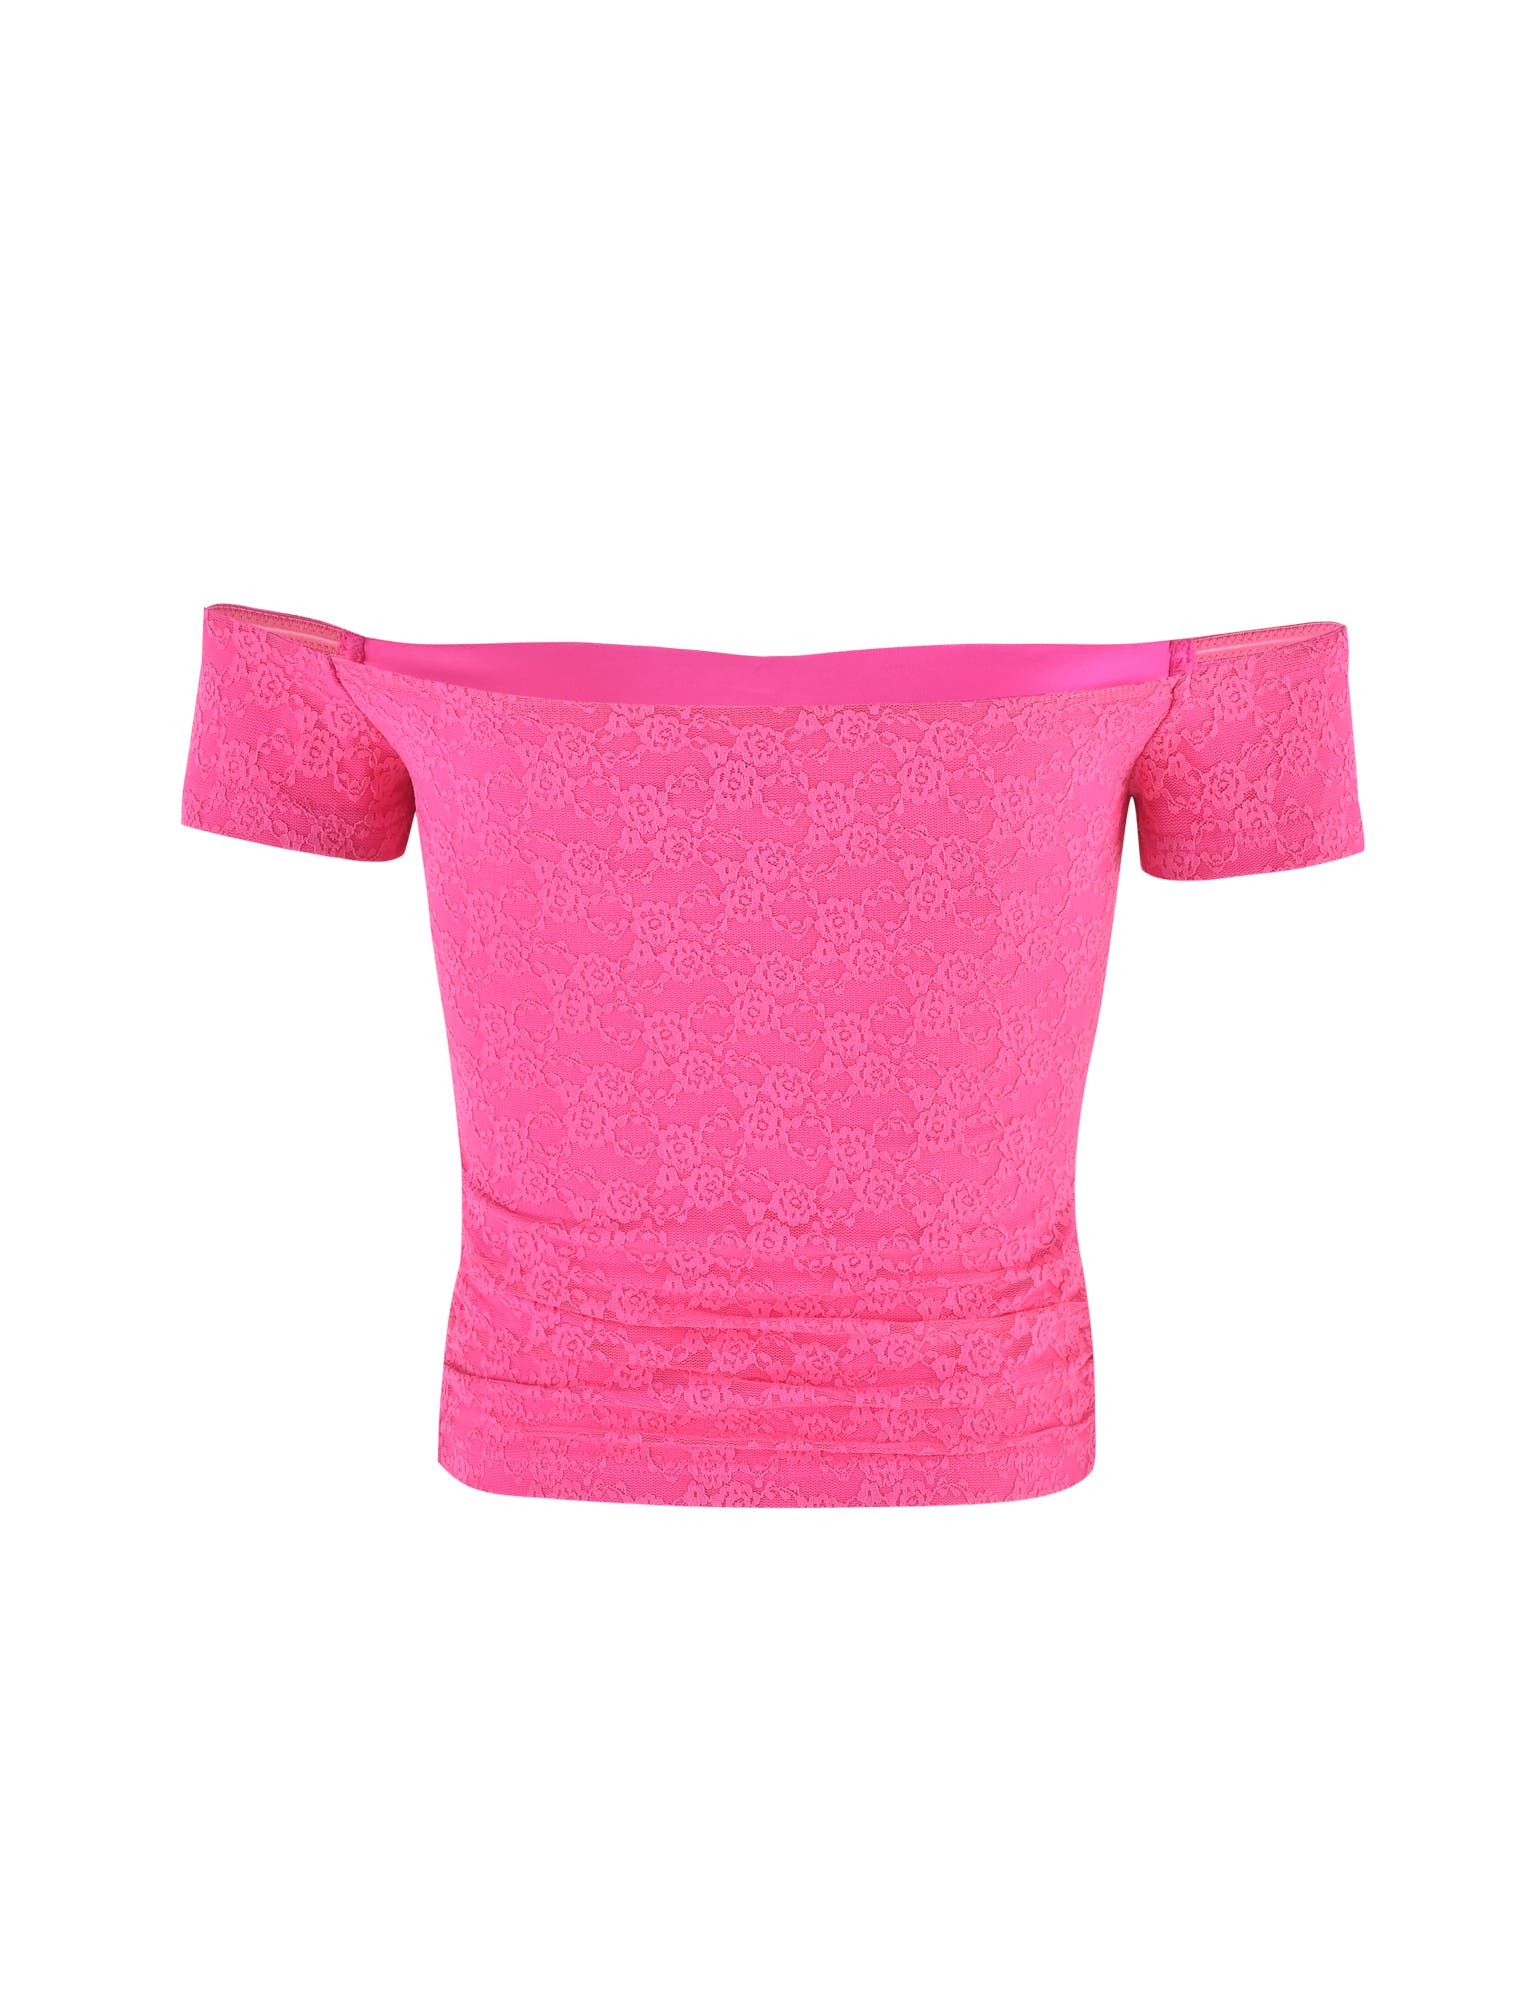 CAIDEN TOP - PINK : HOT PINK : HOT PINK LACE